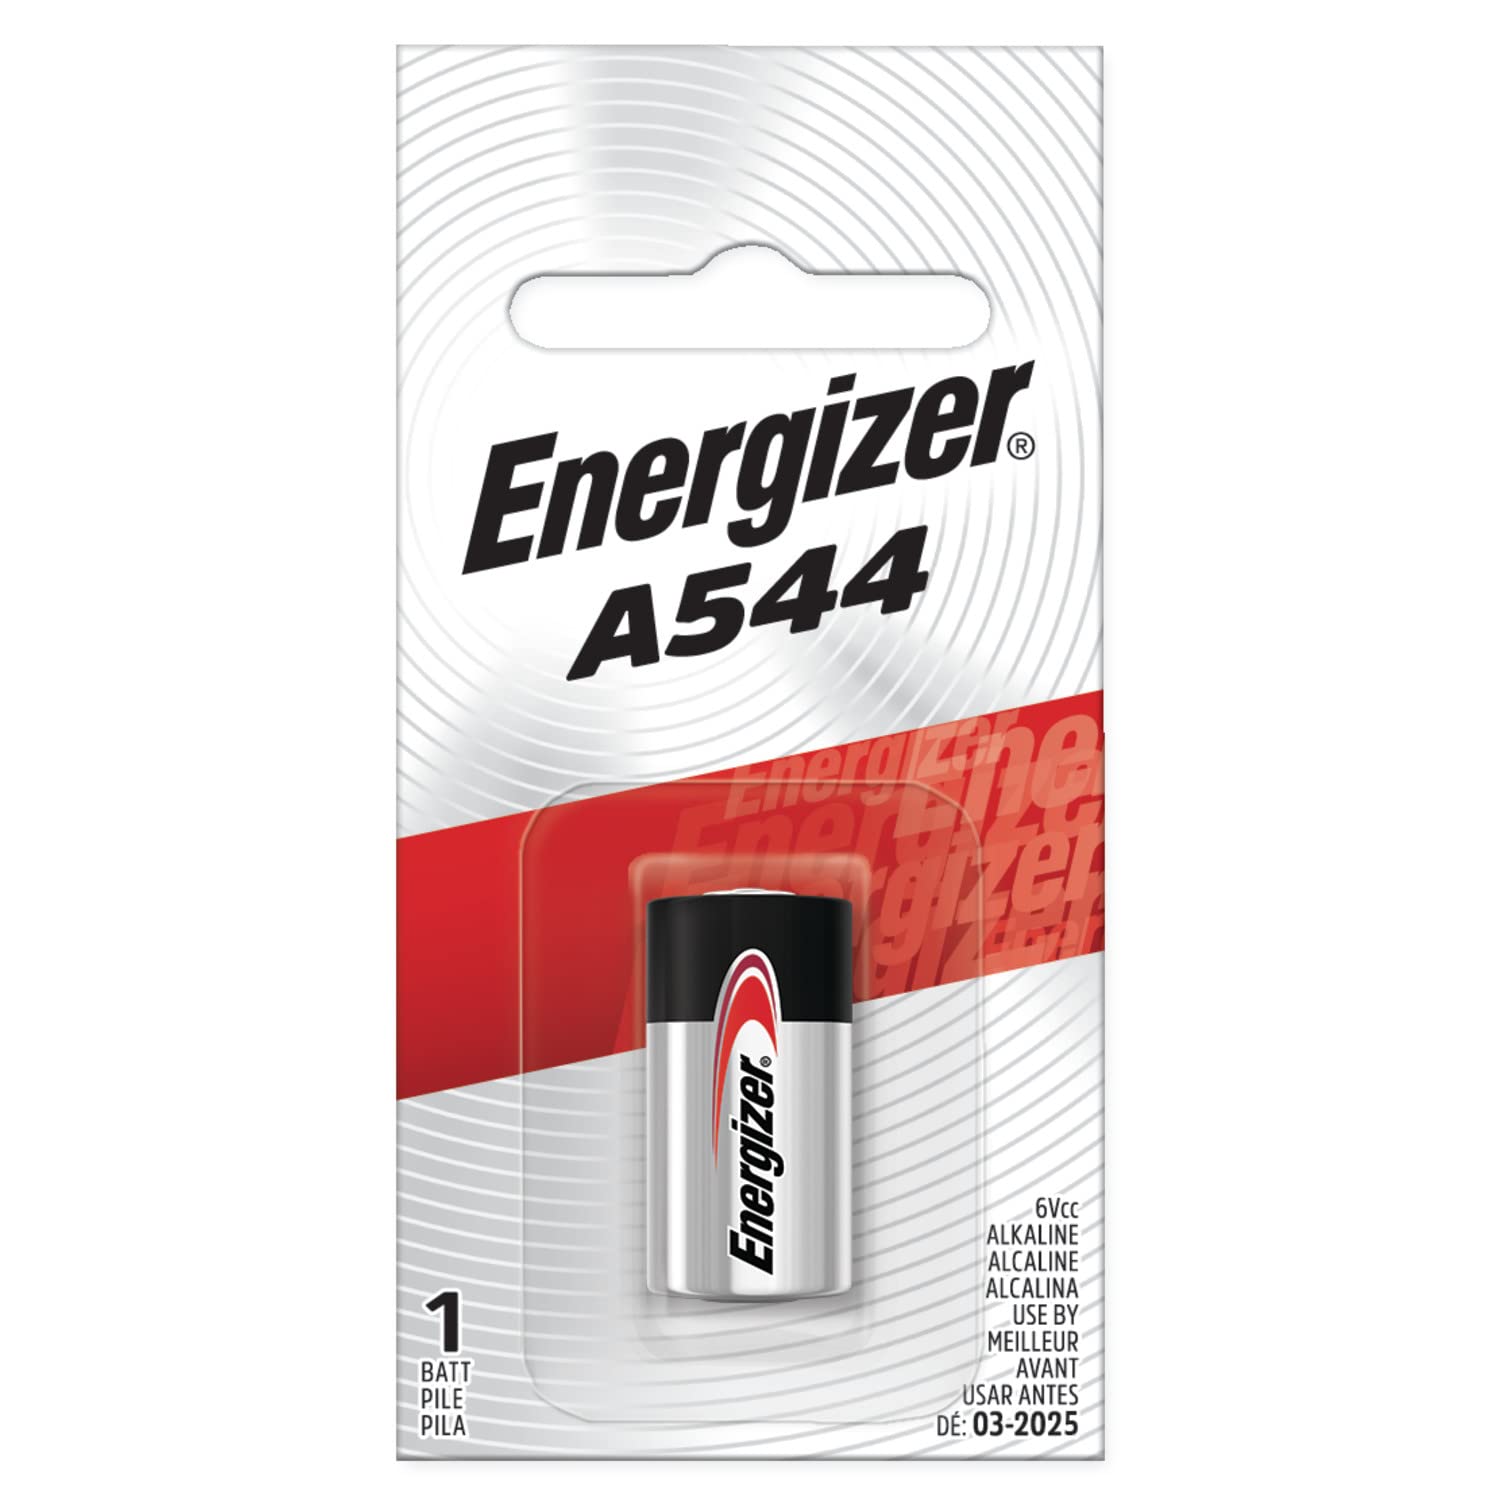 Energizer A544BPZ Zero Mercury Battery, 1 Count (Pack of 1)